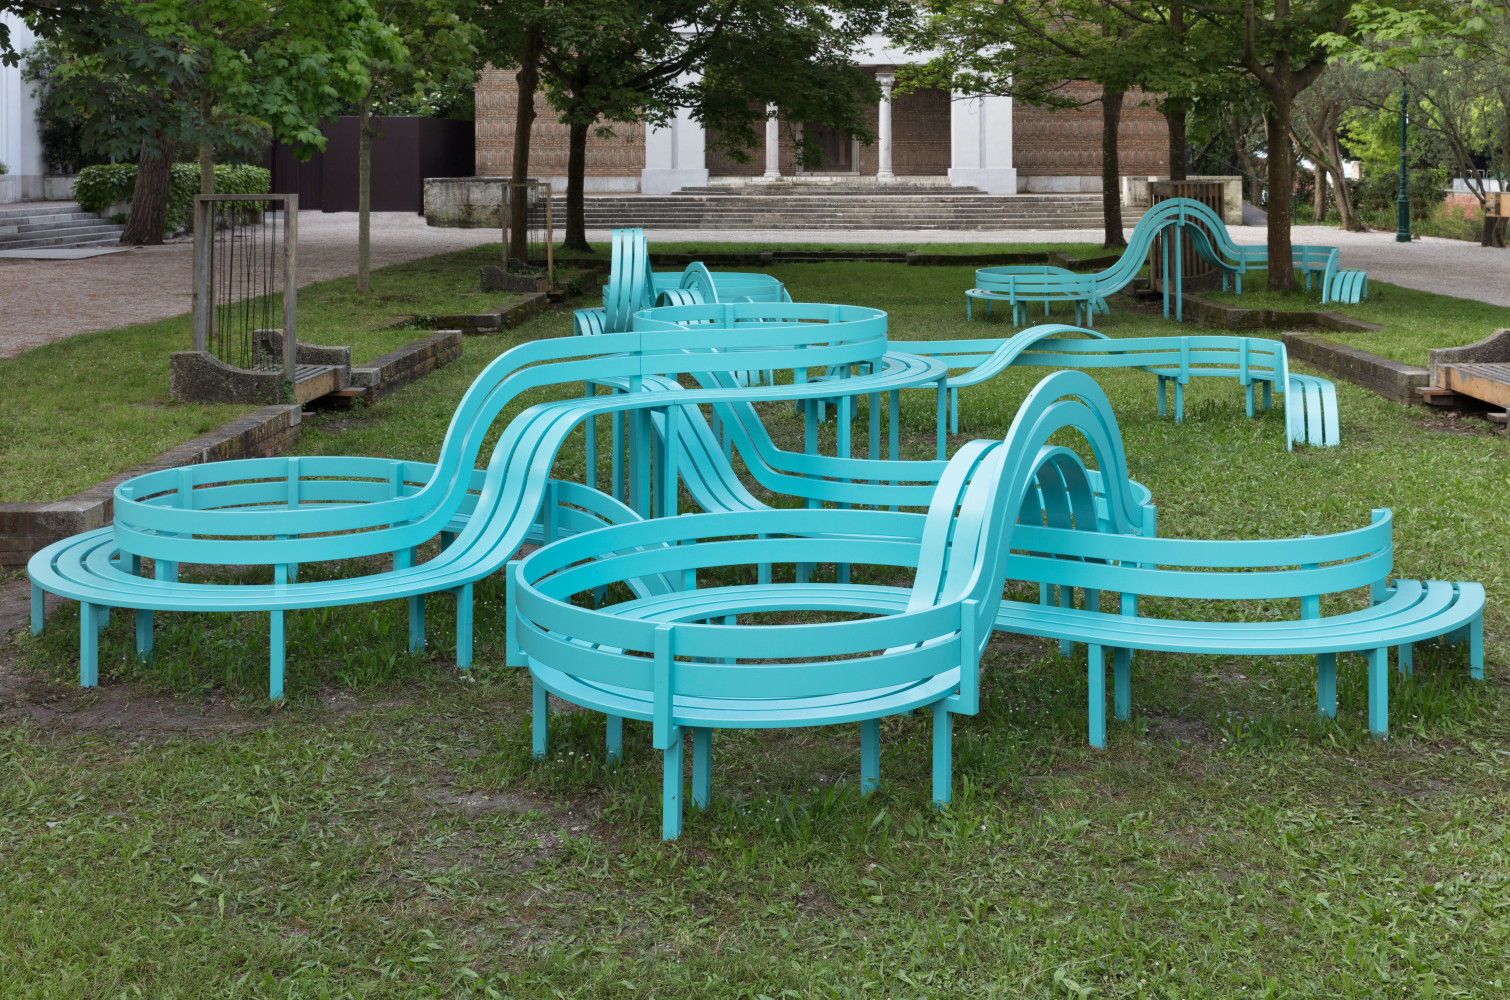 Jeppe Hein

Modified Social Bench for Venice #01

2019

Powder coated aluminum

57 1/8 x 220 7/8 x 209 1/2 inches (145 x 561 x 532 cm)

Edition of 3, with 2 AP

JH 517